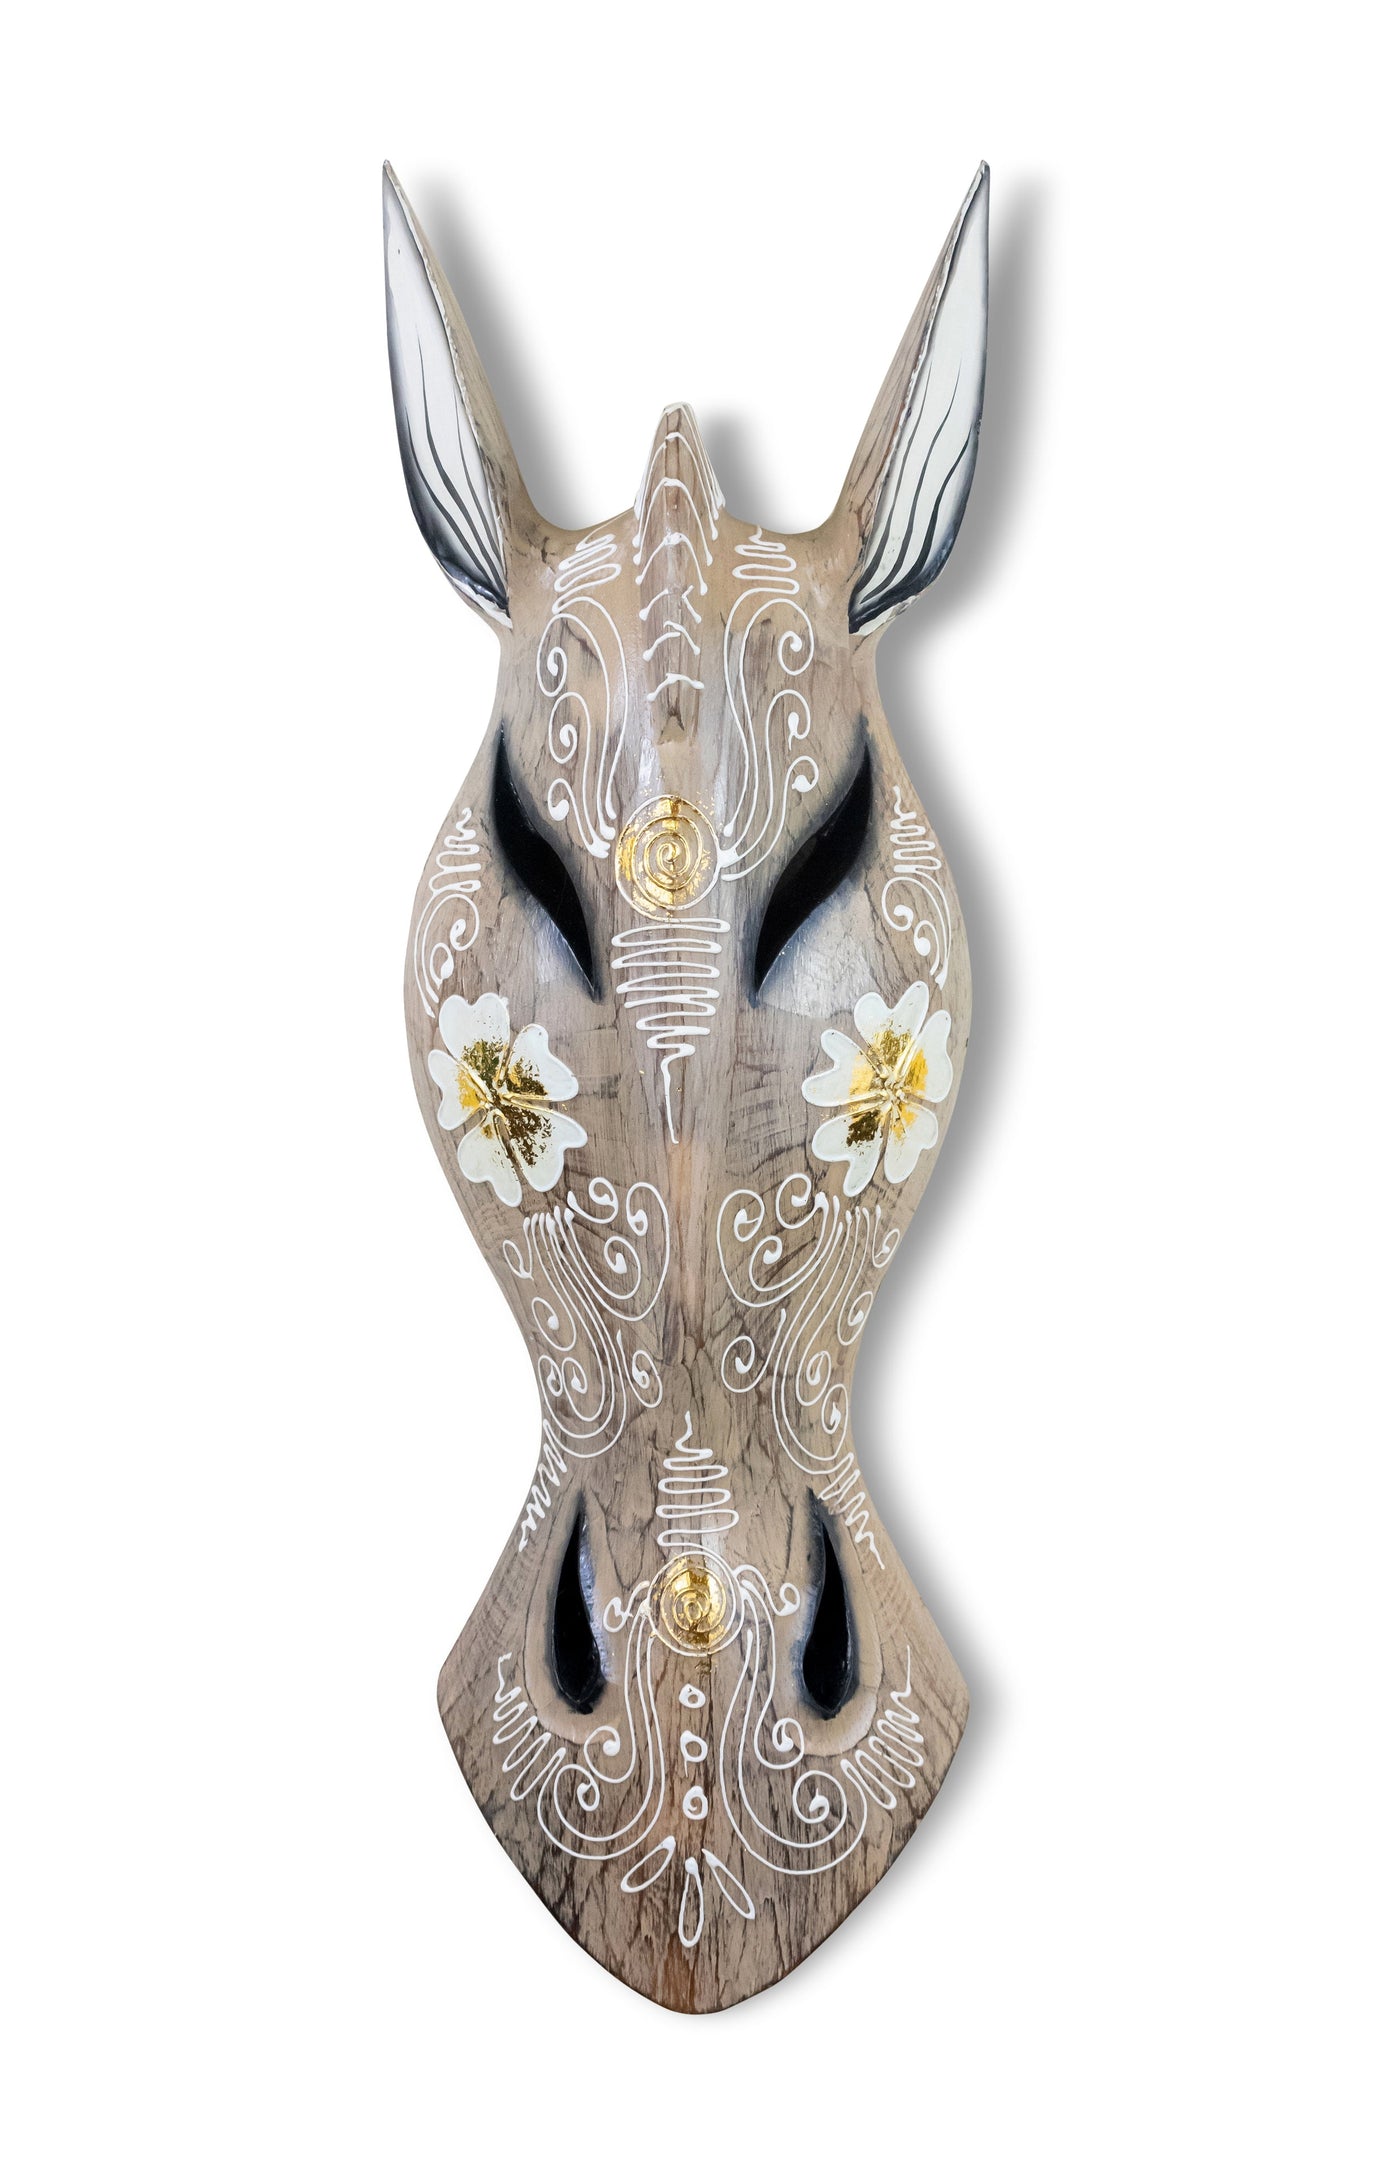 Wooden Tribal African Giraffe Mask Hand Carved Wall Plaque Hanging Home Decor Accent Sculpture Decoration Handmade Handcrafted Cream Flower Motif